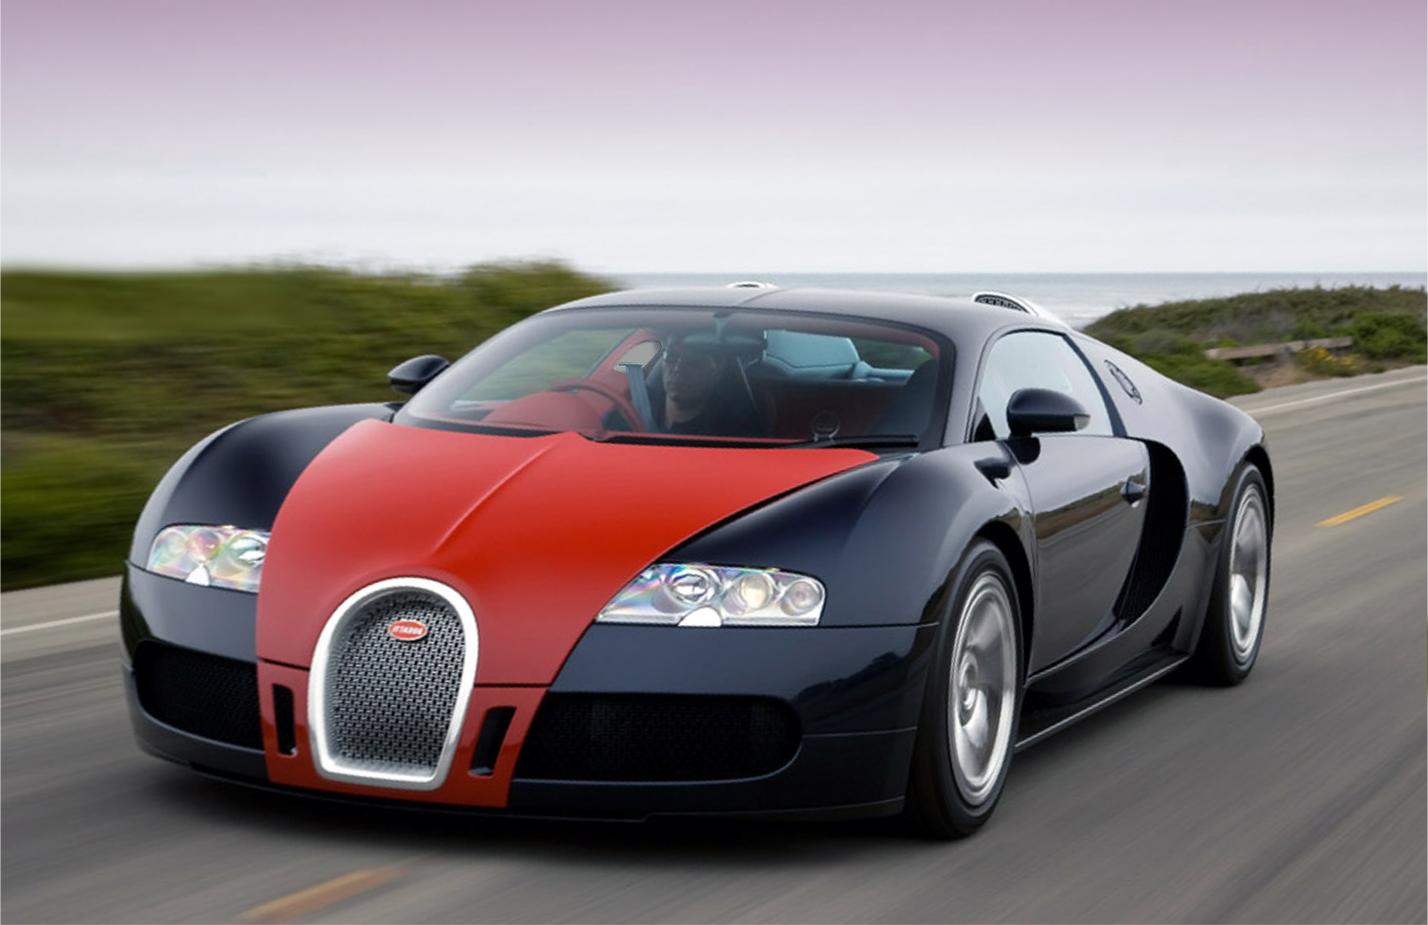 image For > Fastest Car In The World Wallpaper